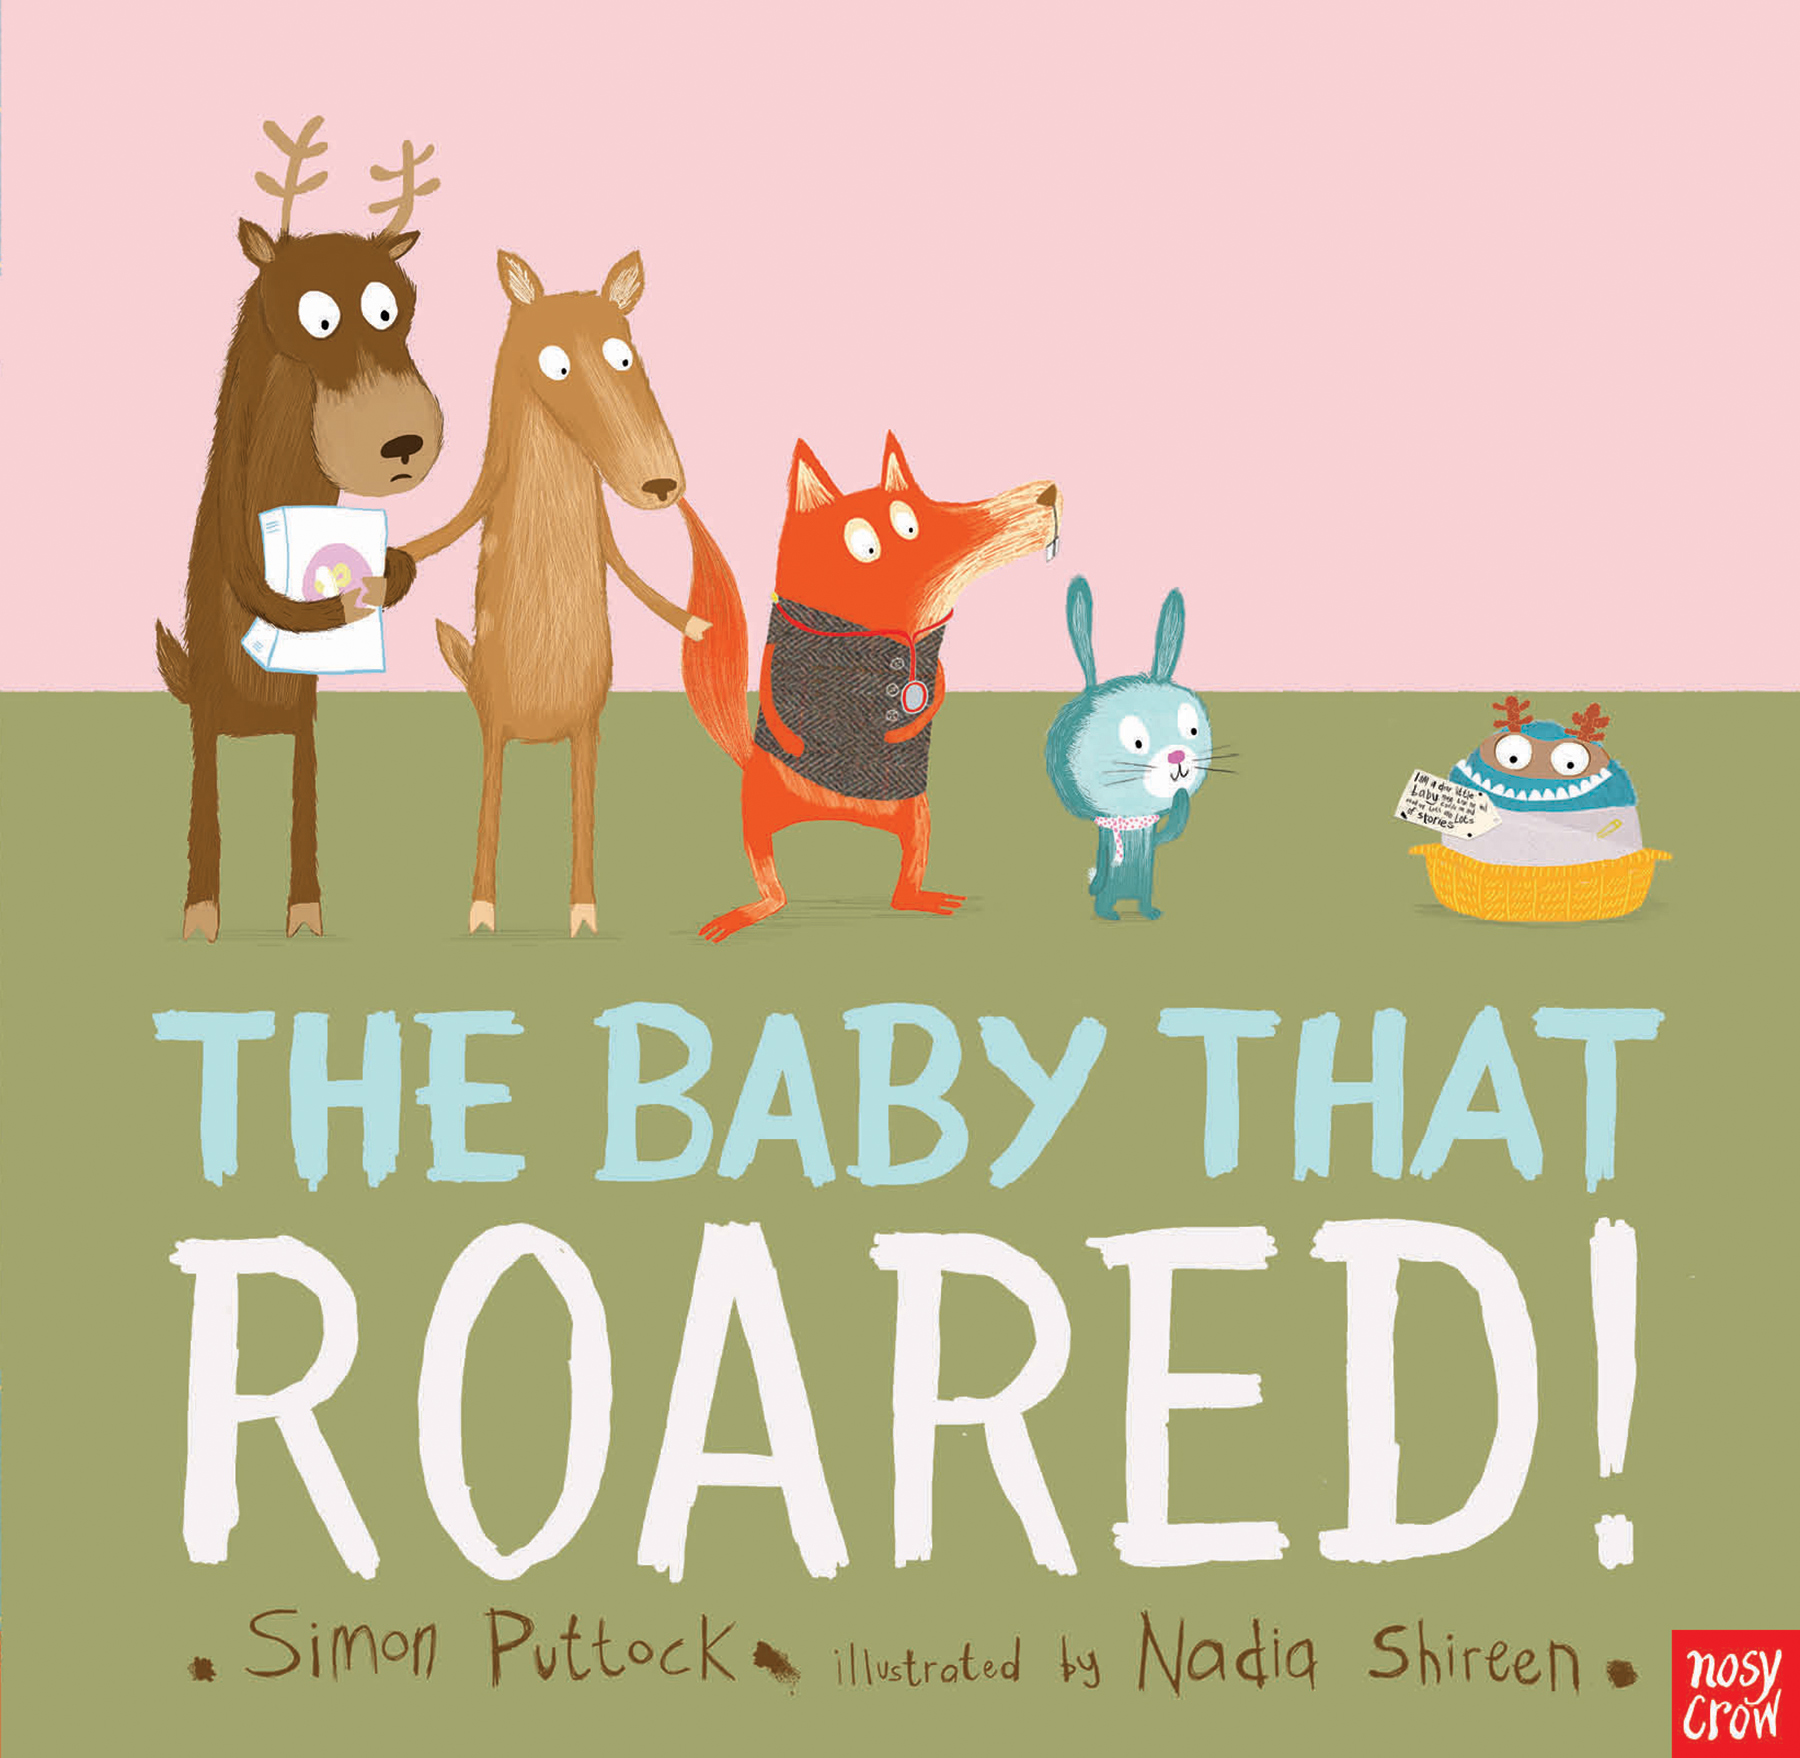 The Baby that Roared | Simon Puttock and Nadia Shireen